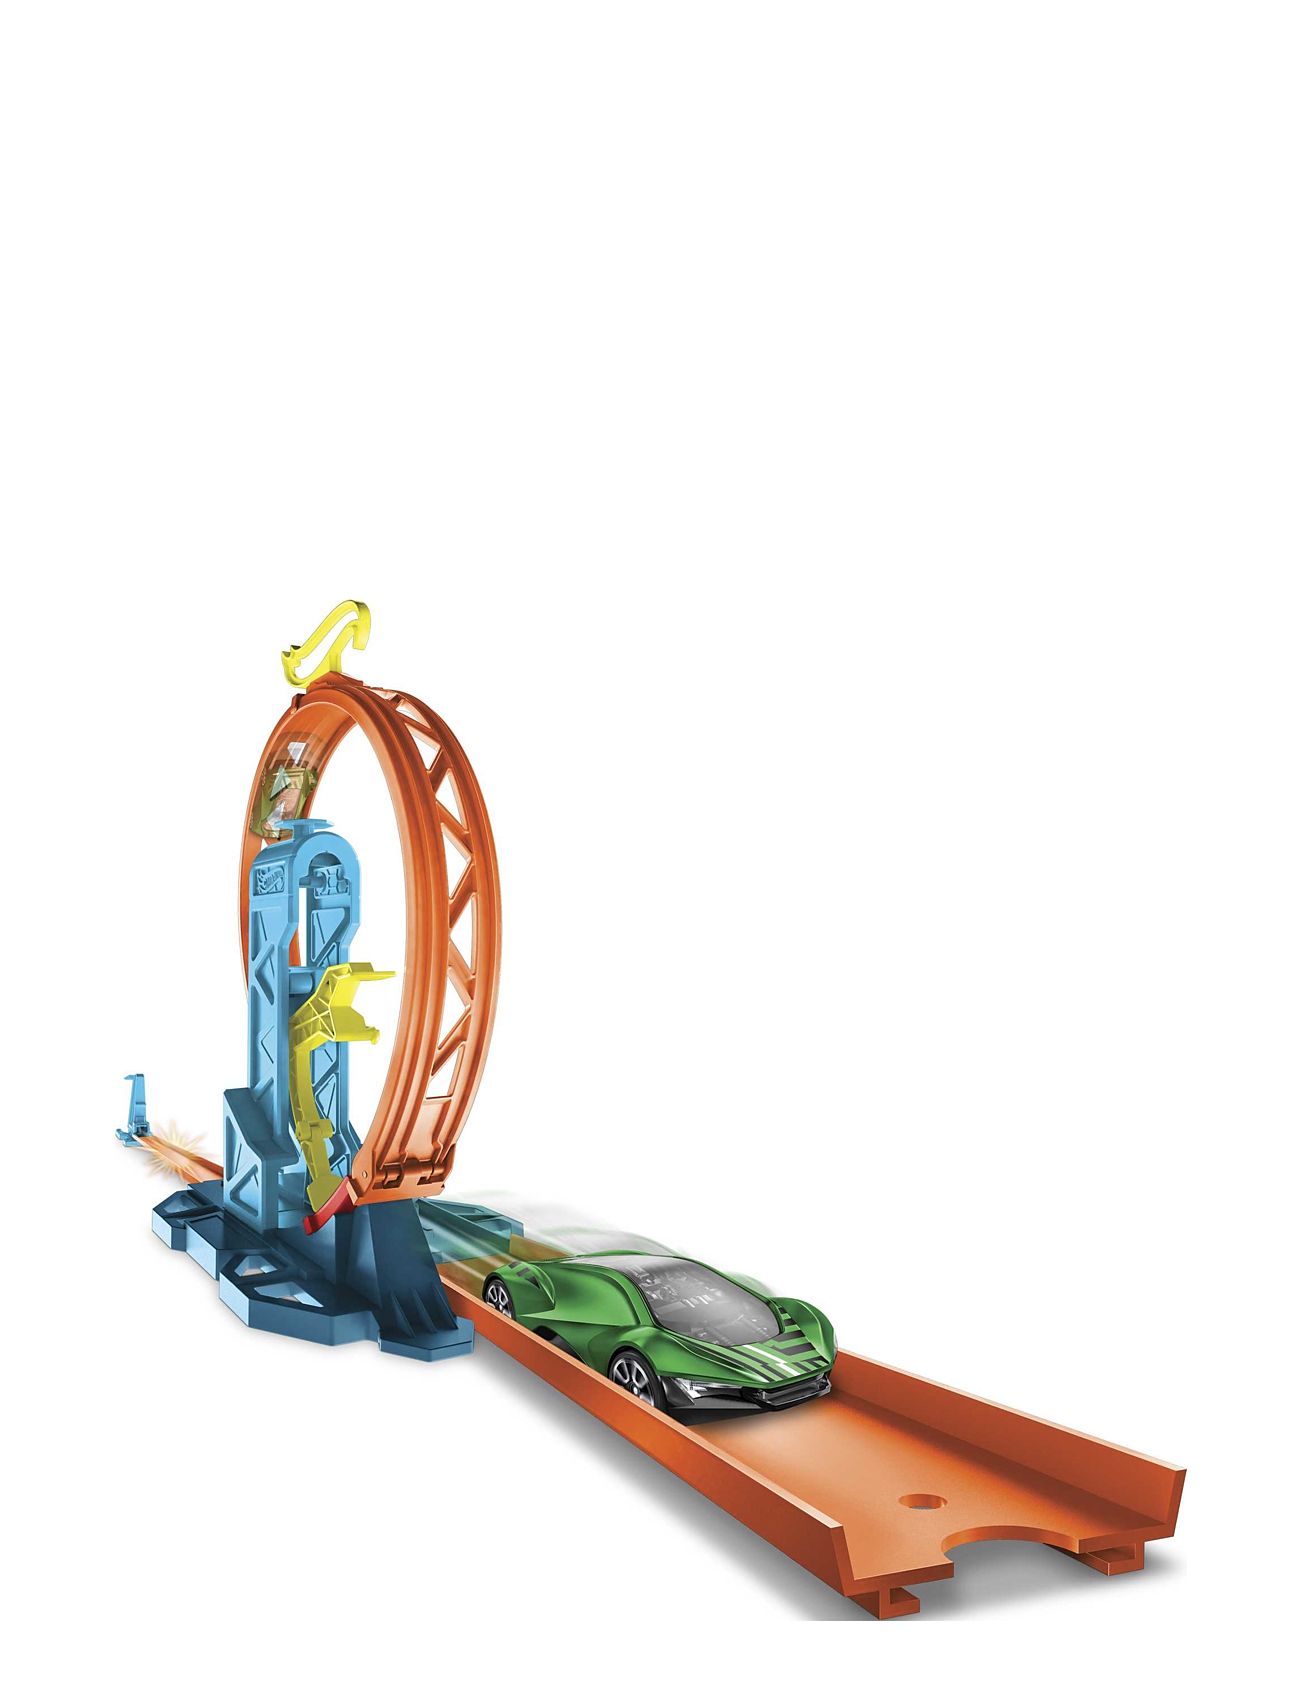 Track Builder Unlimited Loop Kicker Pack Toys Toy Cars & Vehicles Race Tracks Multi/patterned Hot Wheels